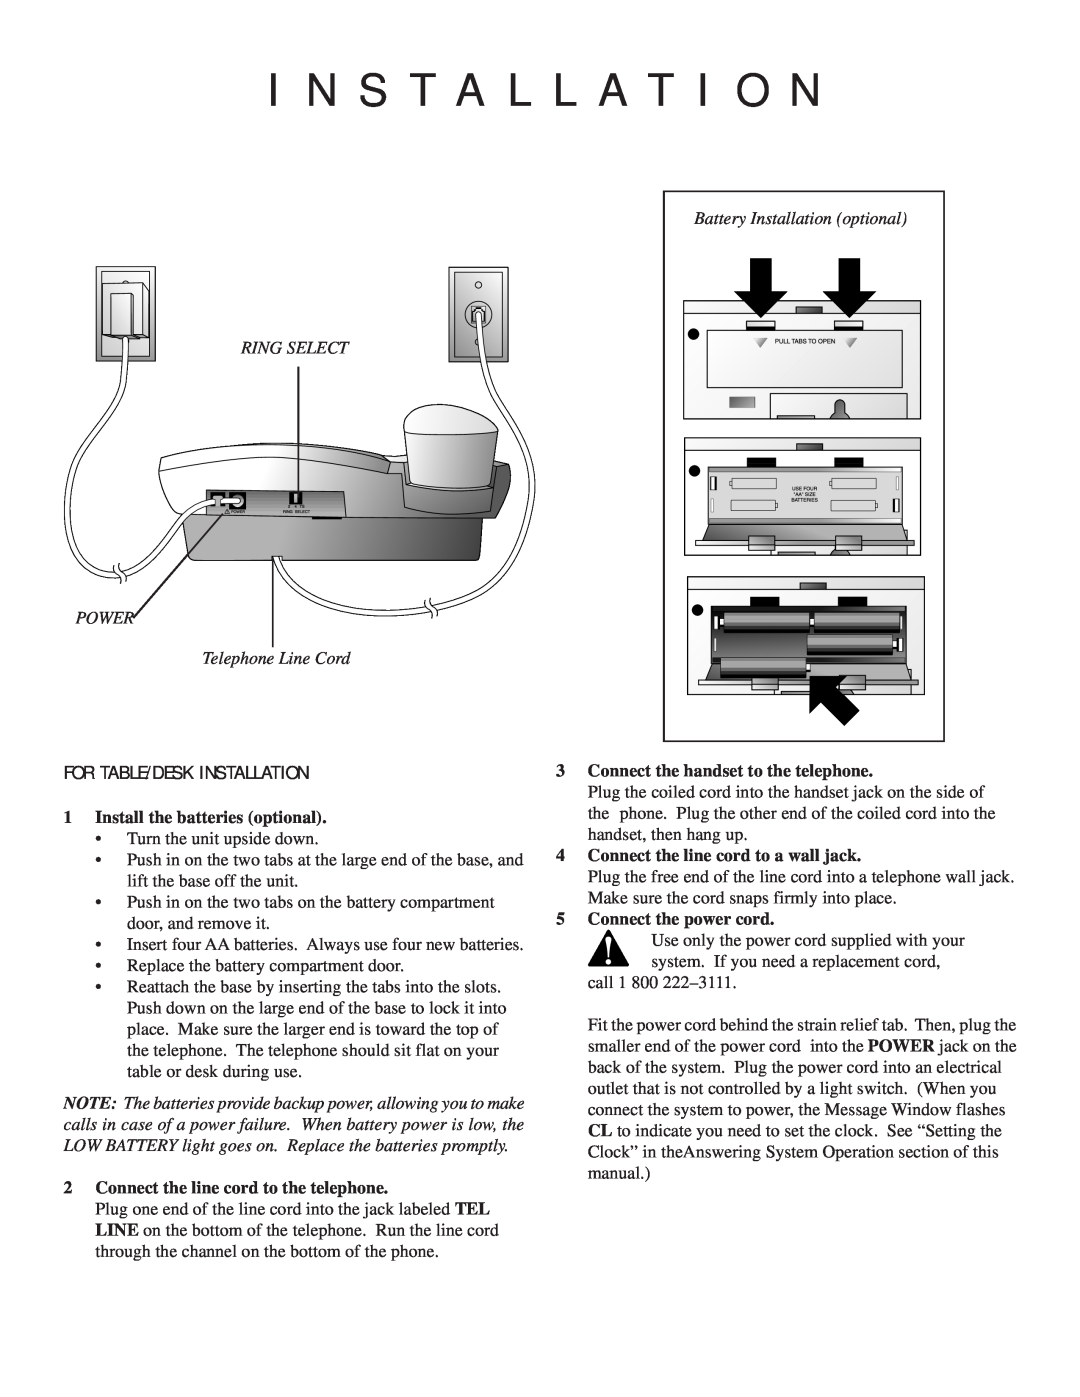 AT&T 1815 user manual I N S T A L, L A T I O N, For Table/Desk Installation, RING SELECT POWER Telephone Line Cord 